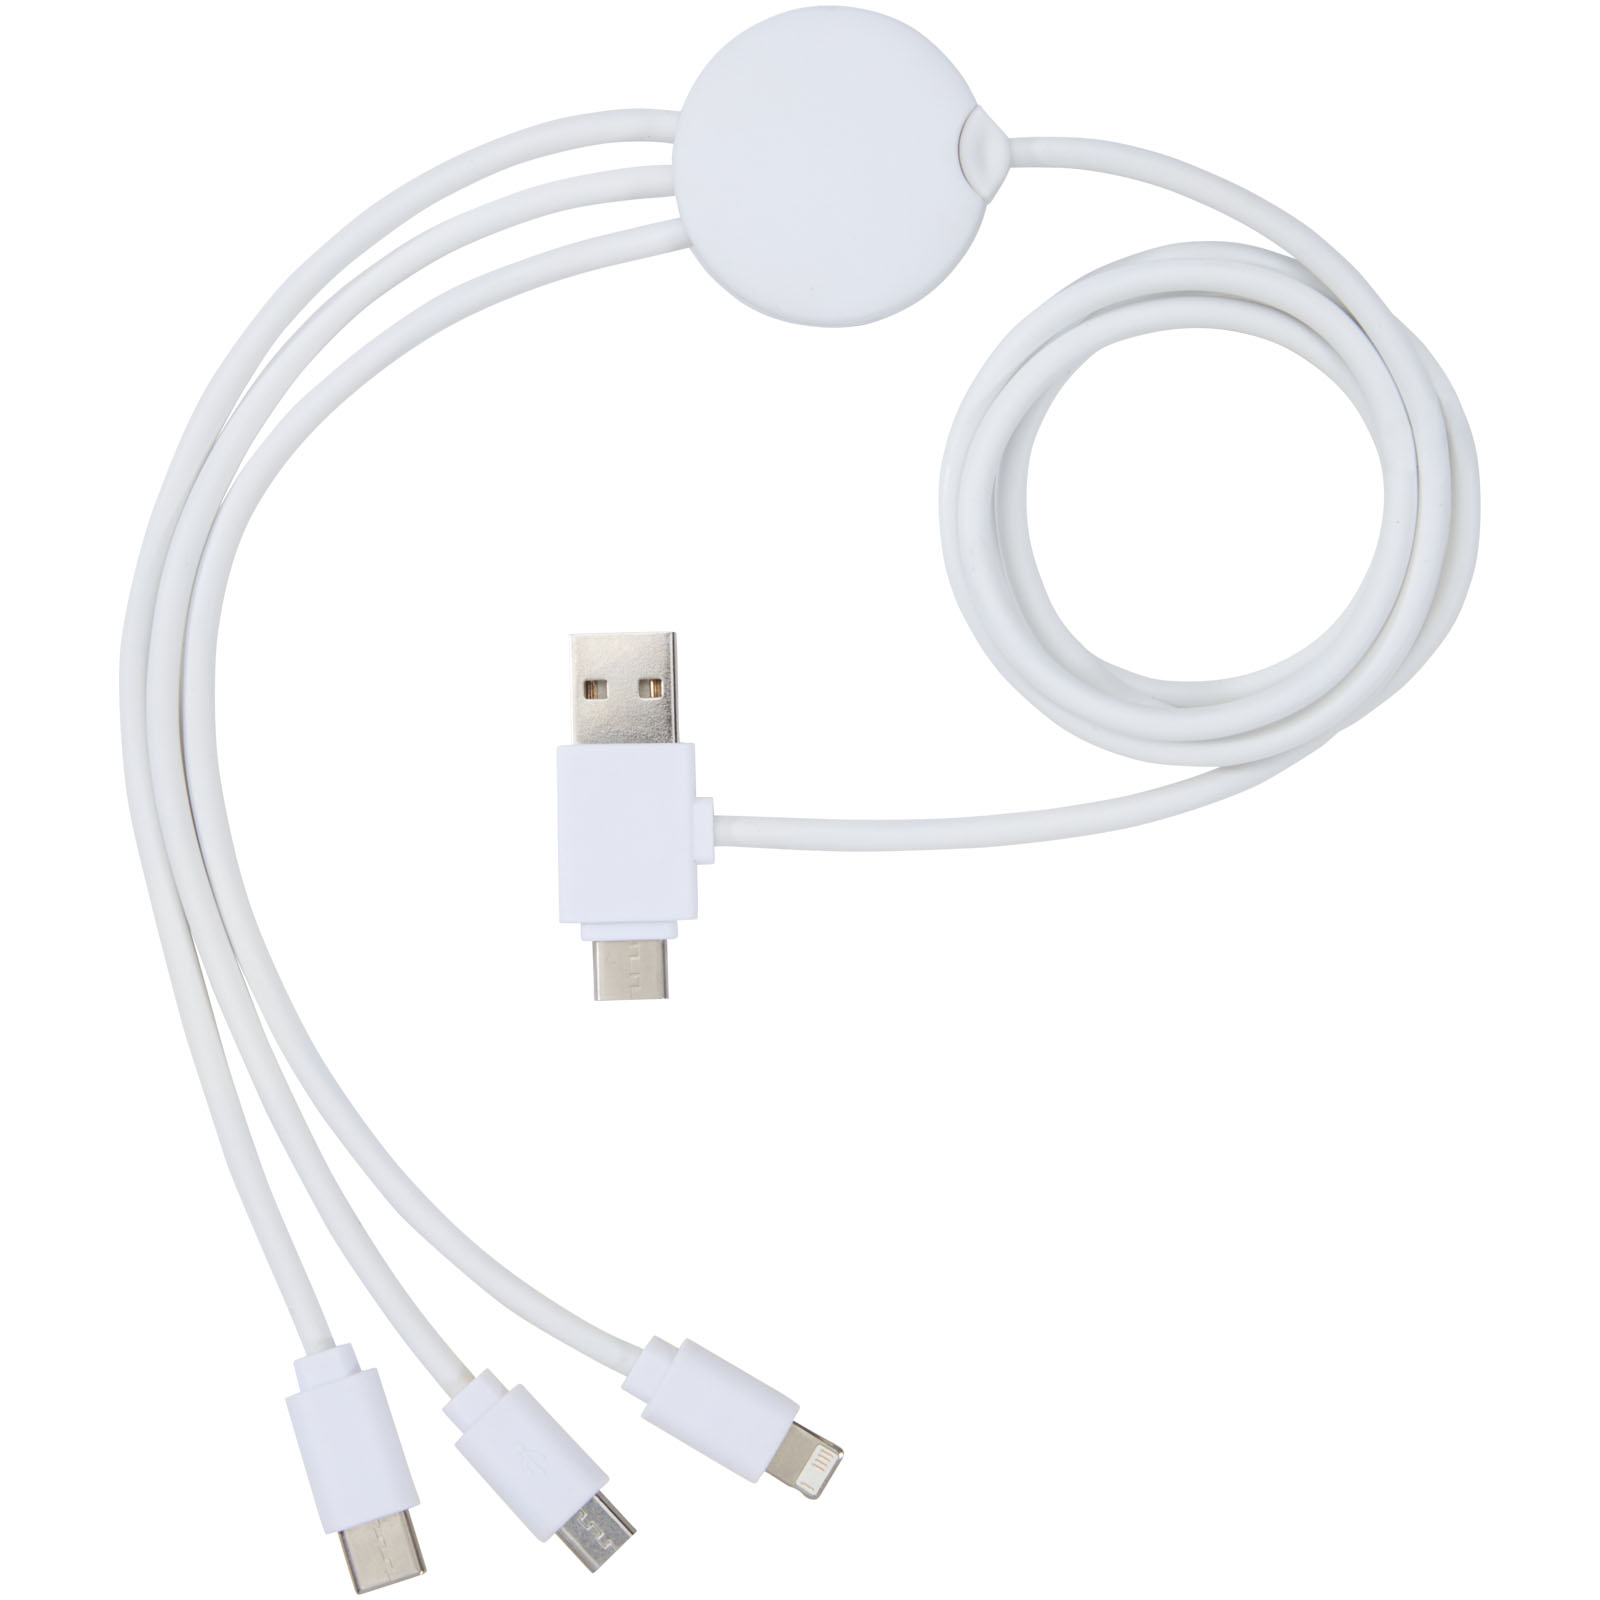 Advertising Cables - Pure 5-in-1 charging cable with antibacterial additive - 1